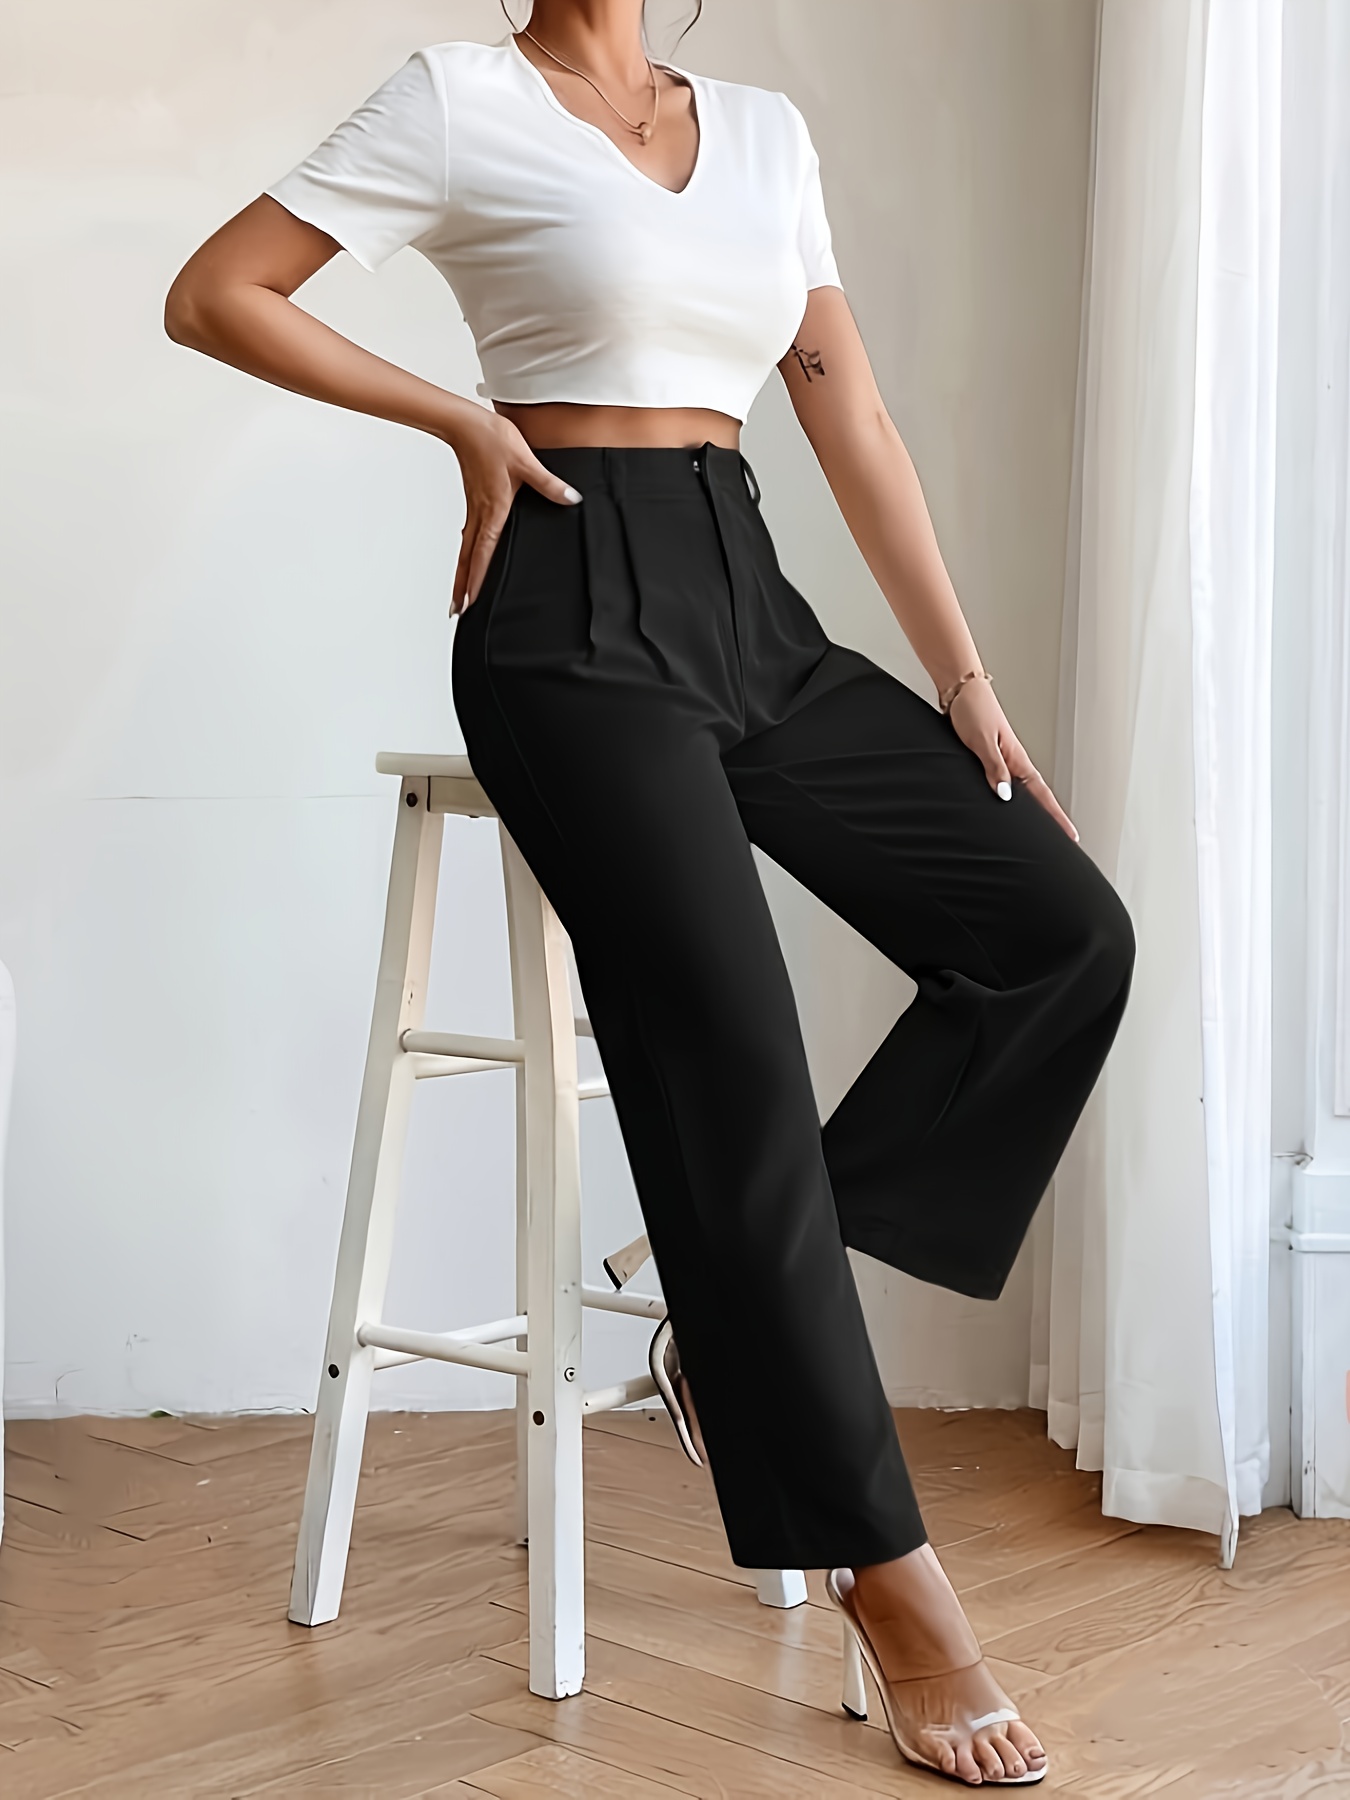 HIGH WAISTED LOOSE PANTS / HOLLYWOOD TROUSERS  High waisted loose pants,  Elegant outfit, Rich outfit